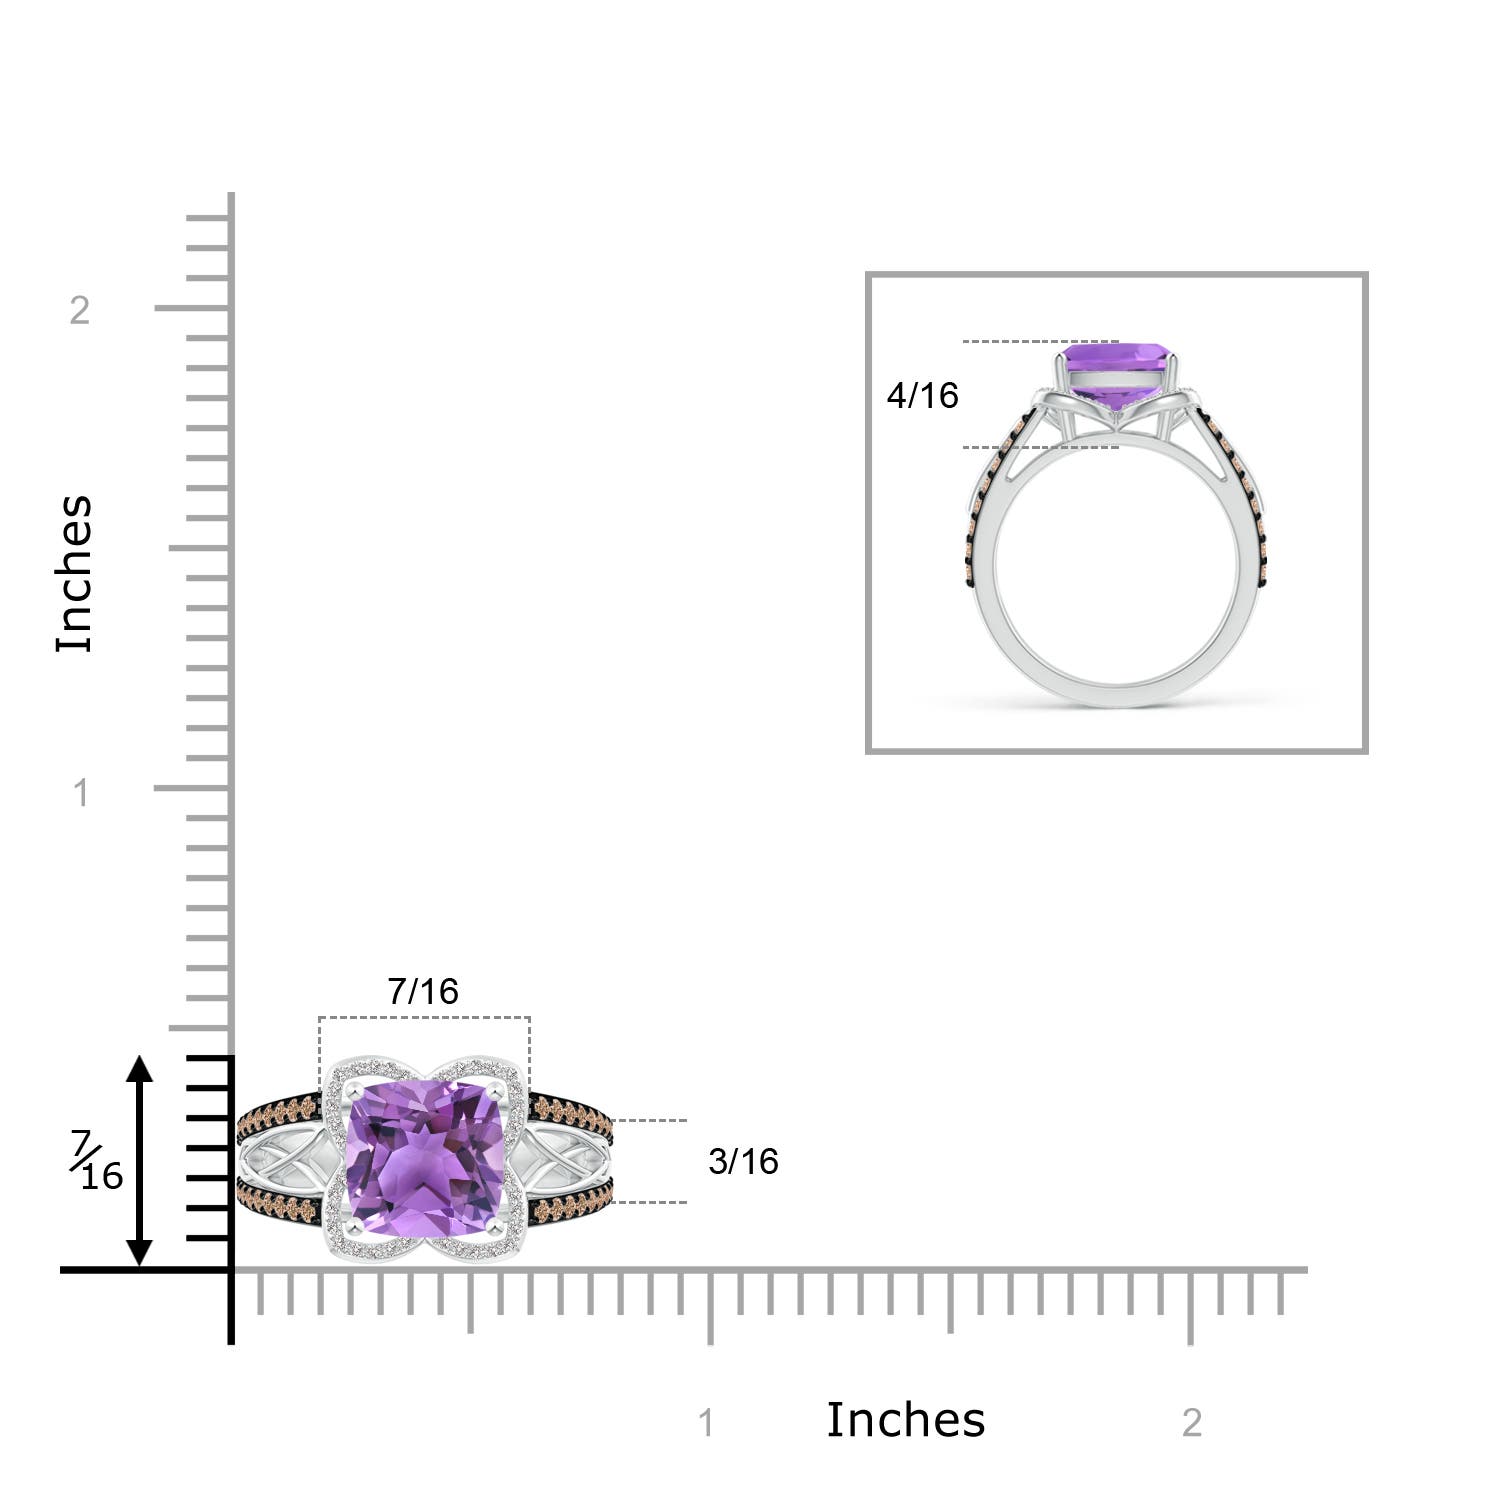 AA - Amethyst / 2.6 CT / 14 KT White Gold